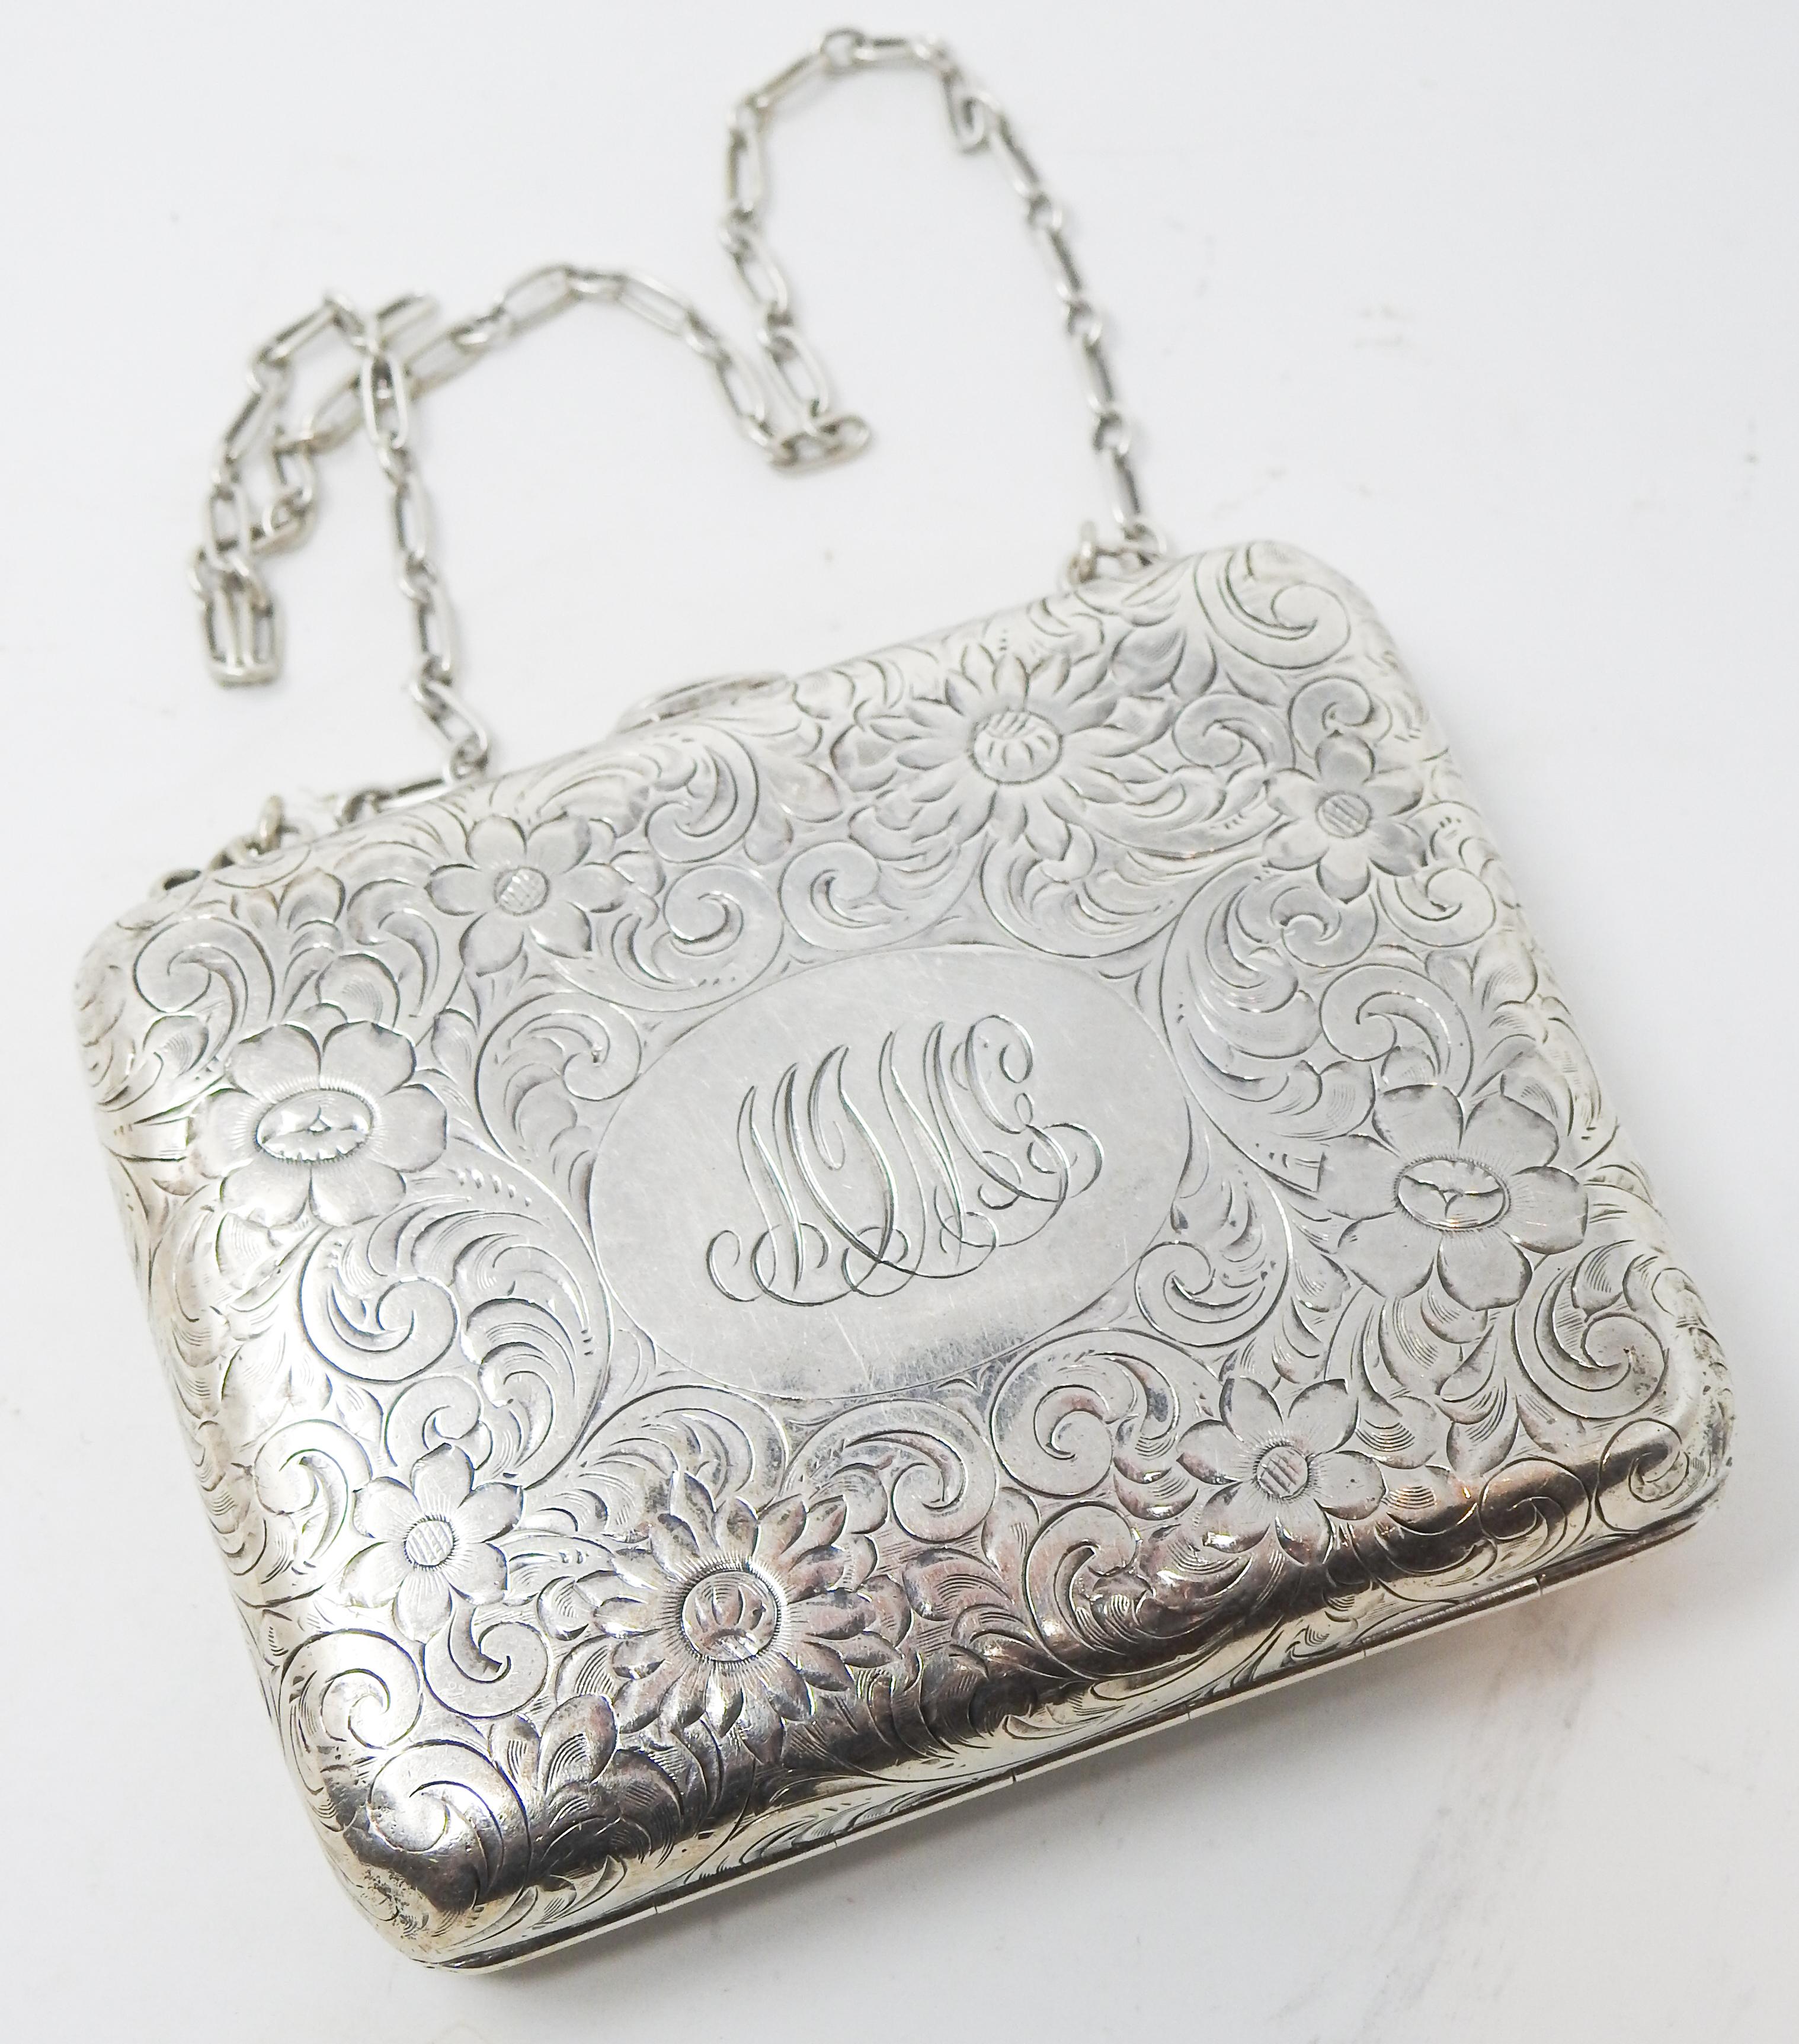 Offering this elegant sterling silver change purse Made for Tiffany & Co. The purses body is covered in floral, foliate, and scrollwork engraved filigree. On the front there is an oval in the center with the initials MJMcC. There is a simple chain,